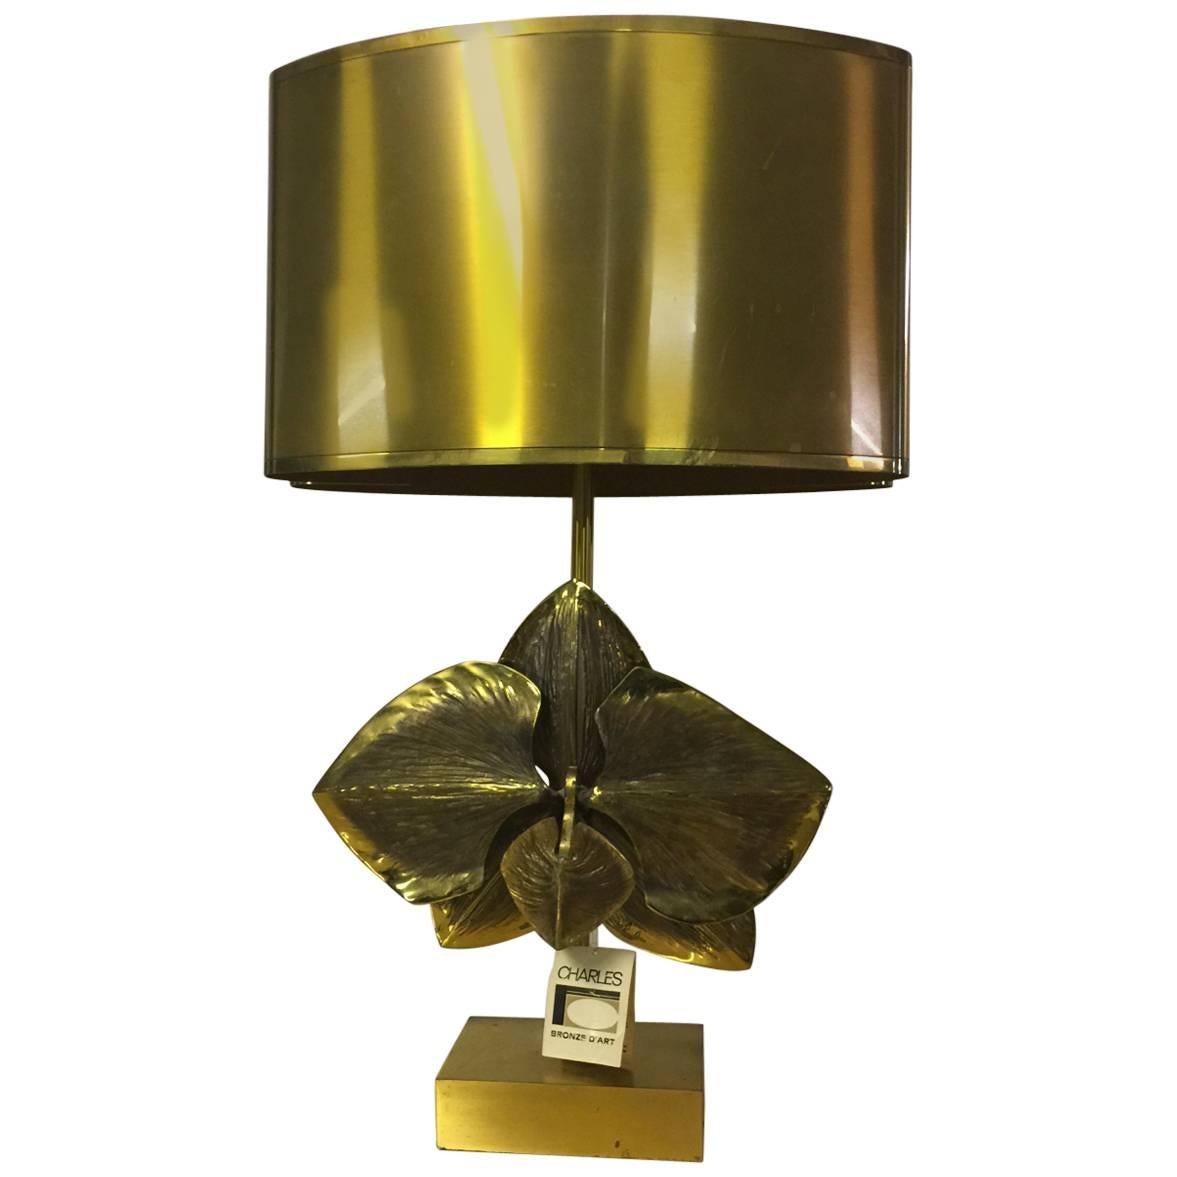 Signed and Numbered Maison Charles Orchid Table Lamp